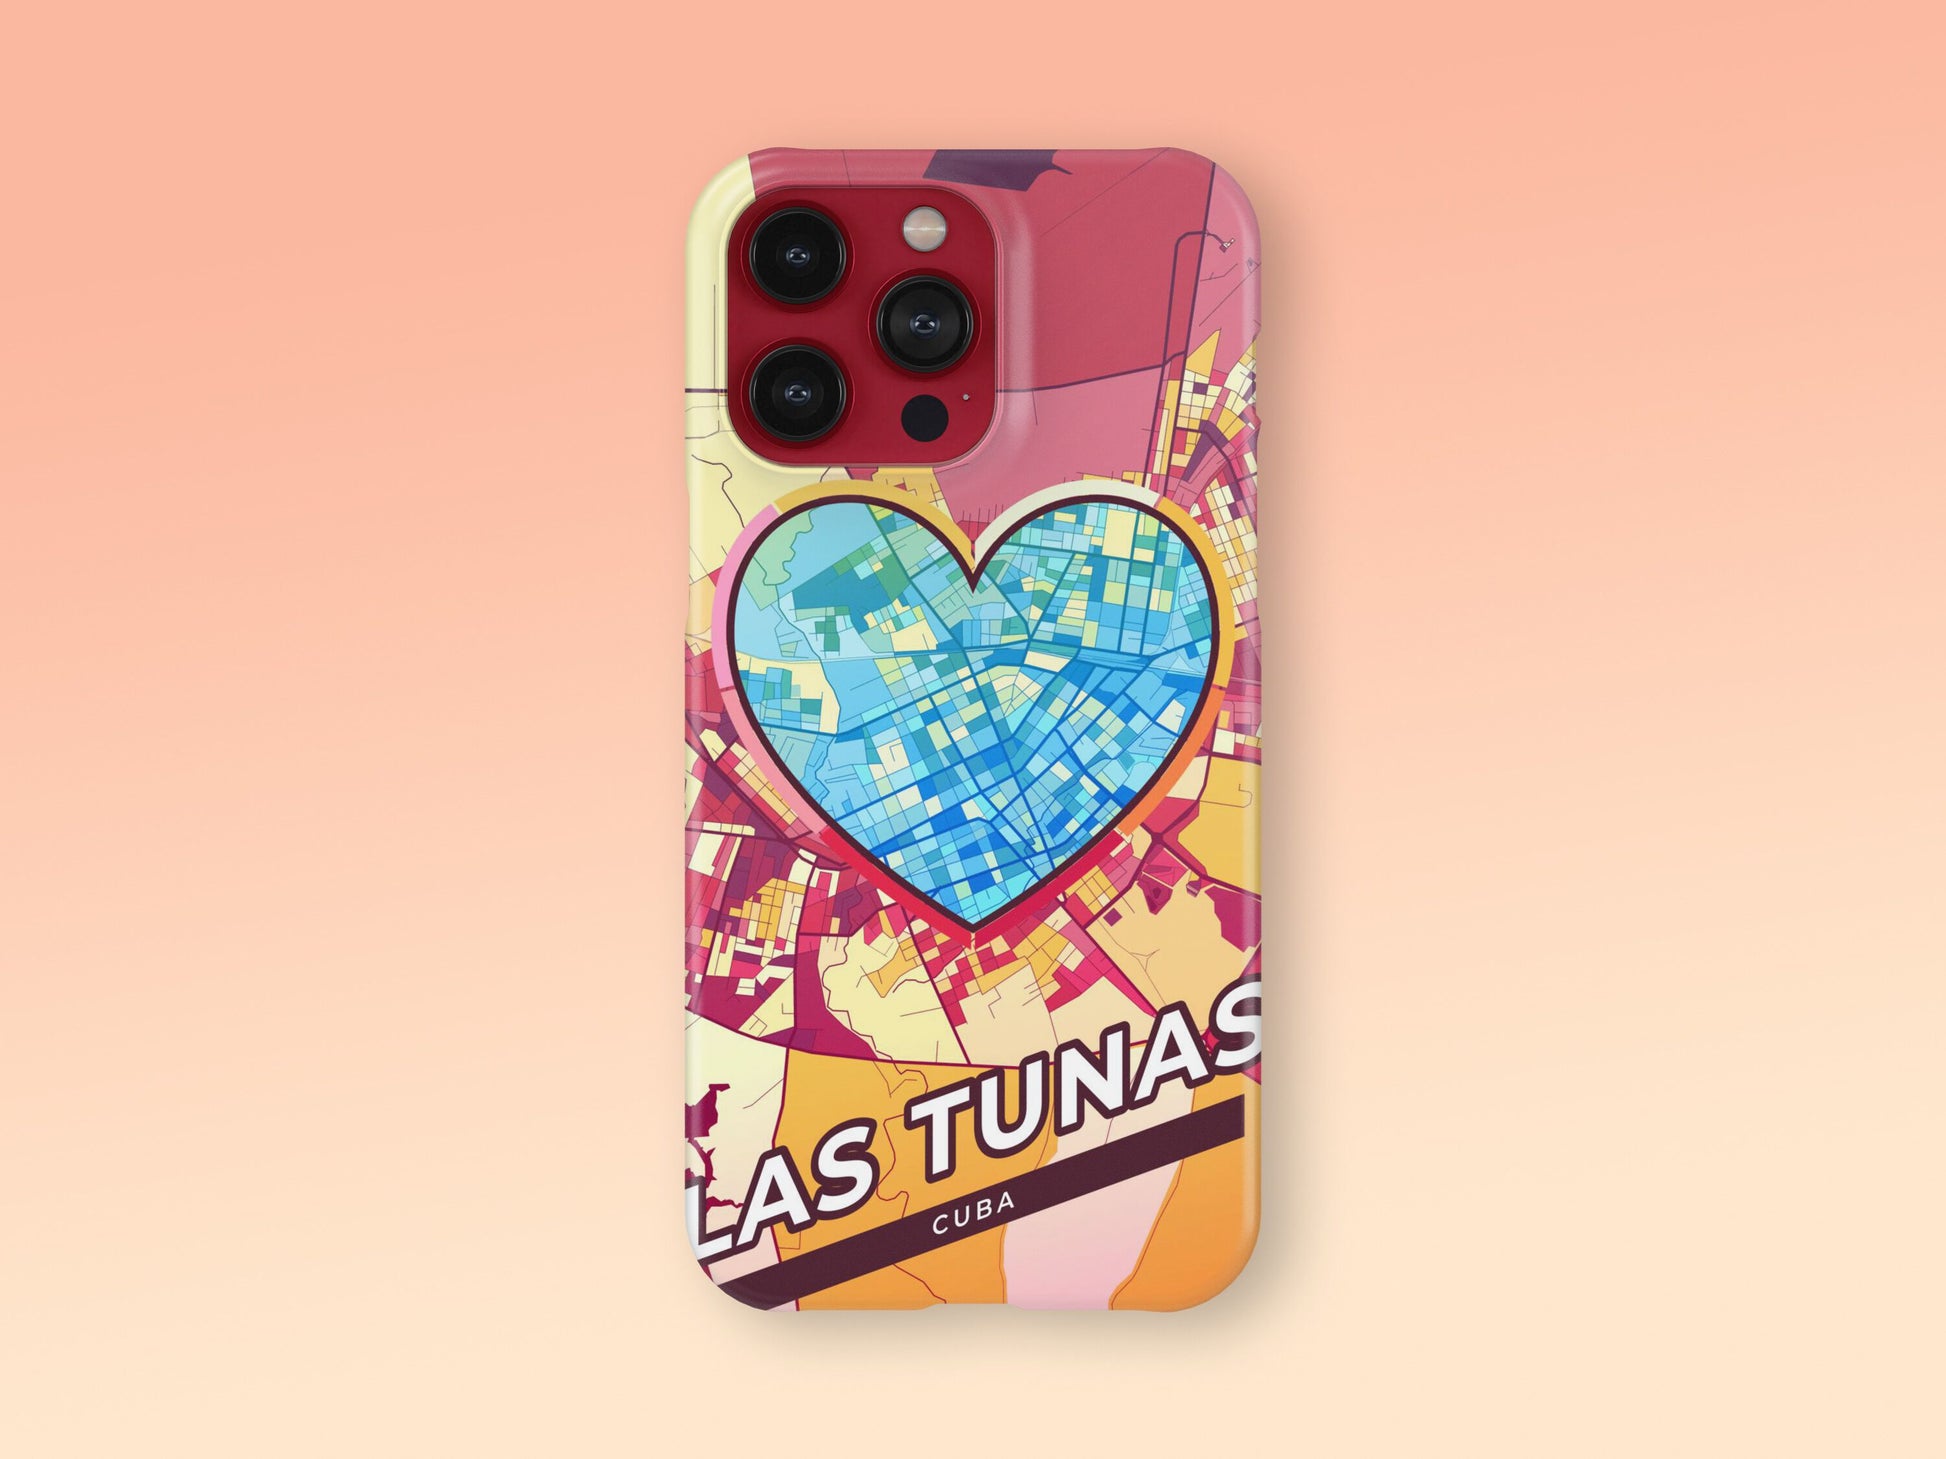 Las Tunas Cuba slim phone case with colorful icon. Birthday, wedding or housewarming gift. Couple match cases. 2